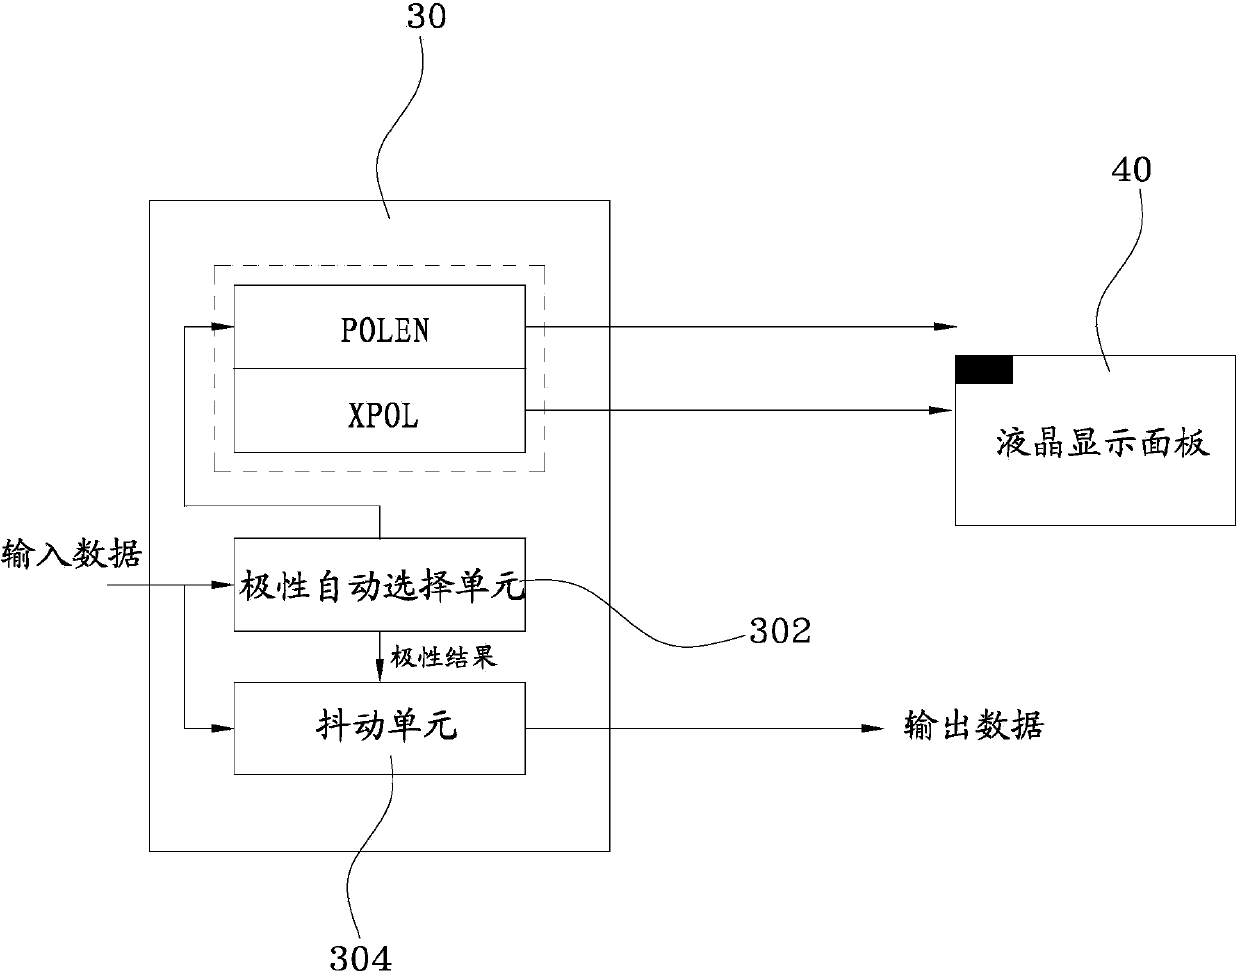 Time schedule controller for liquid crystal display panel